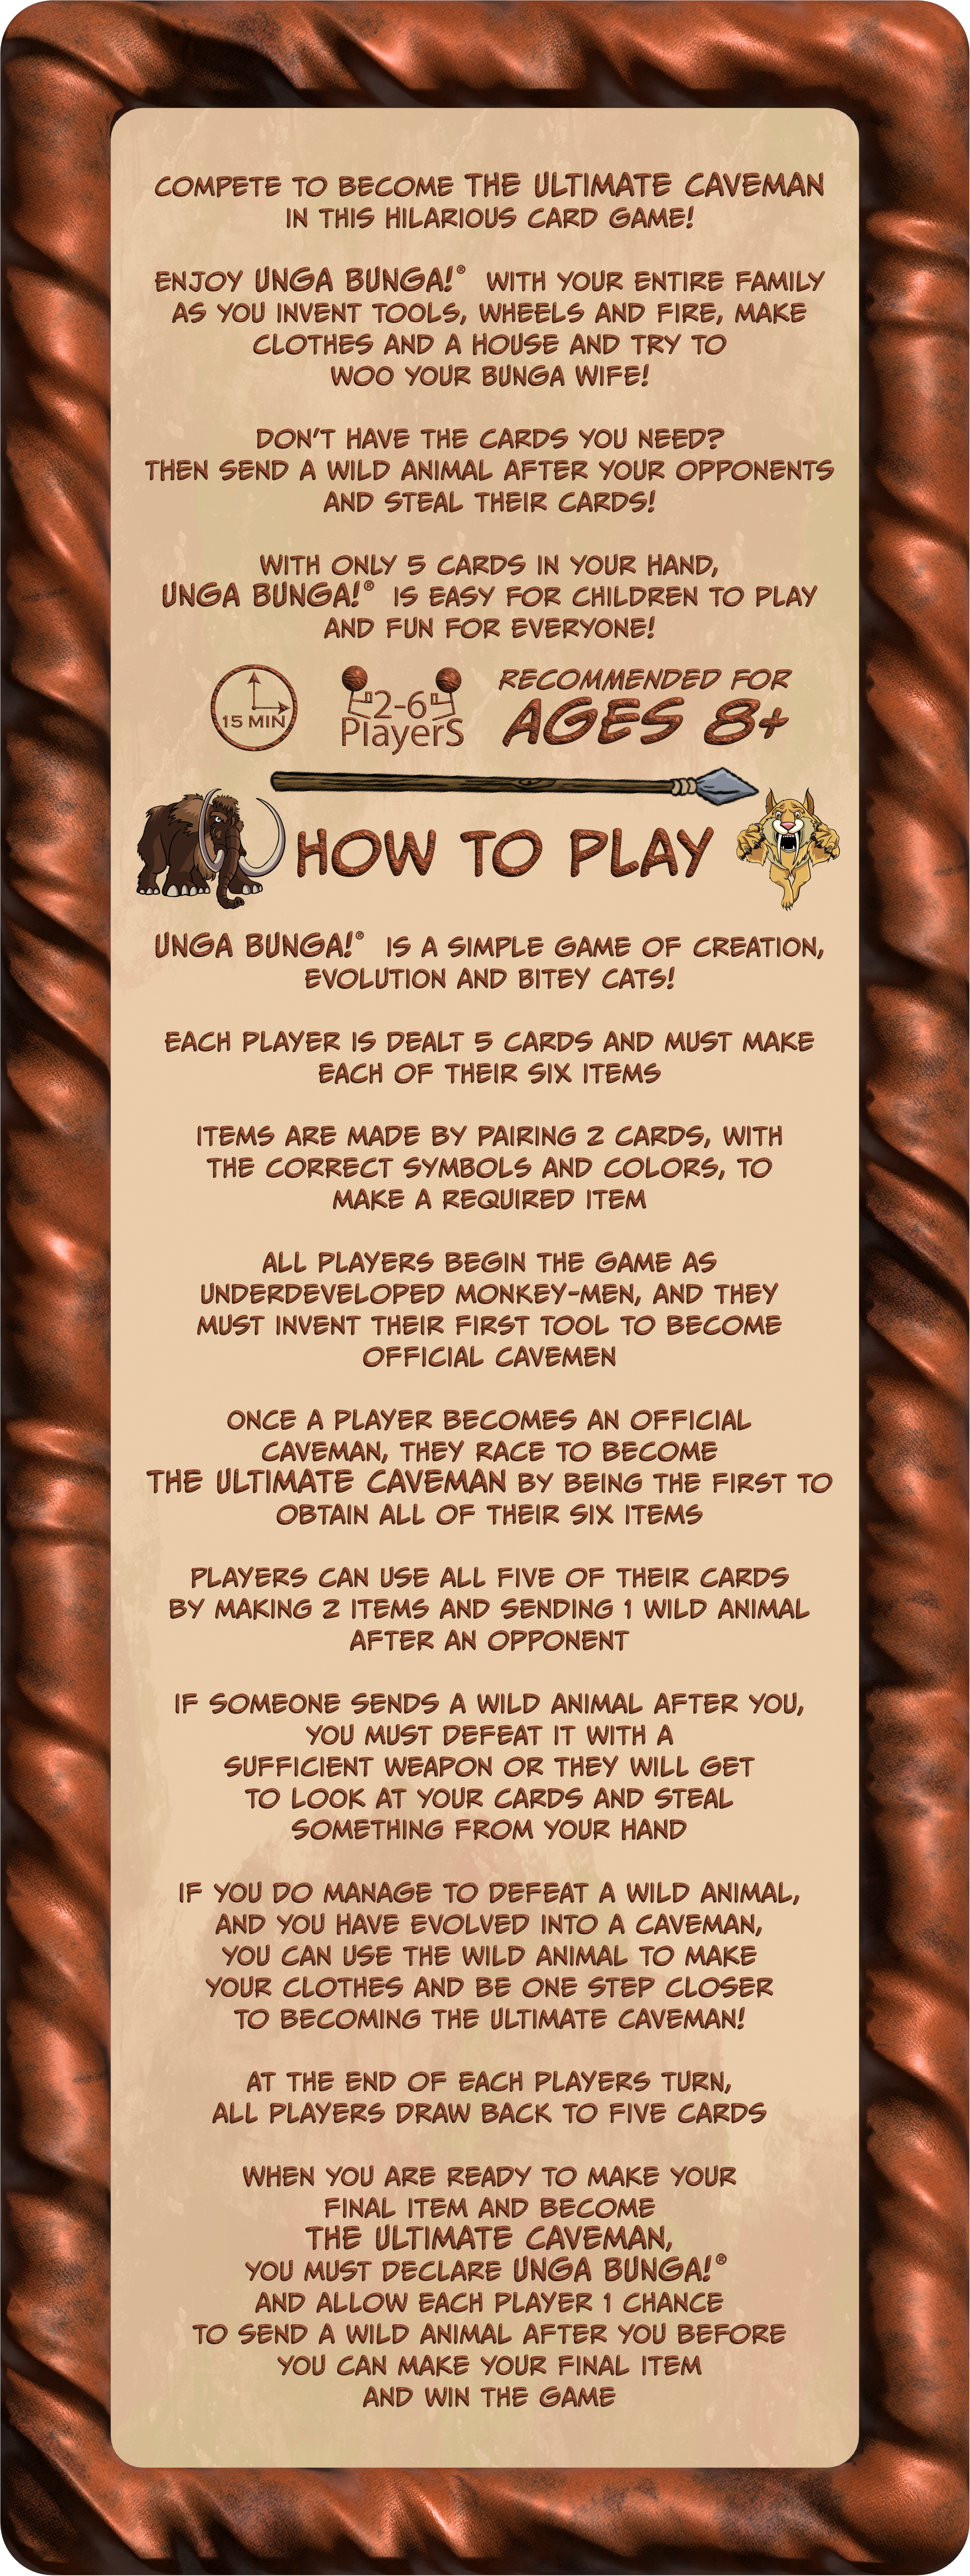 Compete to become the Ultimate Caveman in this hilarious card game!
                    Enjoy UNGA BUNGA!® with your entire family as you invent tools, wheels and fire, make clothes and a house and try to woo your BUNGA Wife!
                    Don’t have the cards you need? Then send a wild animal after your opponents and steal their cards!
                    With only 5 cards in your hand, UNGA BUNGA!® is easy for children to play and fun for everyone!
                    UNGA BUNGA!® is a simple game of evolution, creation and Bitey Cats!
                    Each player is dealt 5 cards and must make each of their six items. Items are made by pairing 2 cards, with the correct symbols and colors, to make a required item. All players begin the game as underdeveloped monkey-men, and they must invent their first Tool to become official cavemen. Once a player becomes an official caveman, they race to become the Ultimate Caveman by being the first to obtain all of their six items. Players can use all five of their cards by making 2 items and sending 1 wild animal after an opponent. If someone sends a wild animal after you, you must defeat it with a sufficient weapon or they will get to look at your cards and steal something from your hand. If you do manage to defeat a wild animal and you have evolved into a caveman you can use the wild animal to make your clothes and be one step closer to becoming the Ultimate Caveman! At the end of each players turn, all players draw back to five cards. When you are ready to make your final item and become the Ultimate Caveman, you must declare UNGA BUNGA!® and allow each player 1 chance to send a wild animal after you before you can make your final item and win the game.
                    